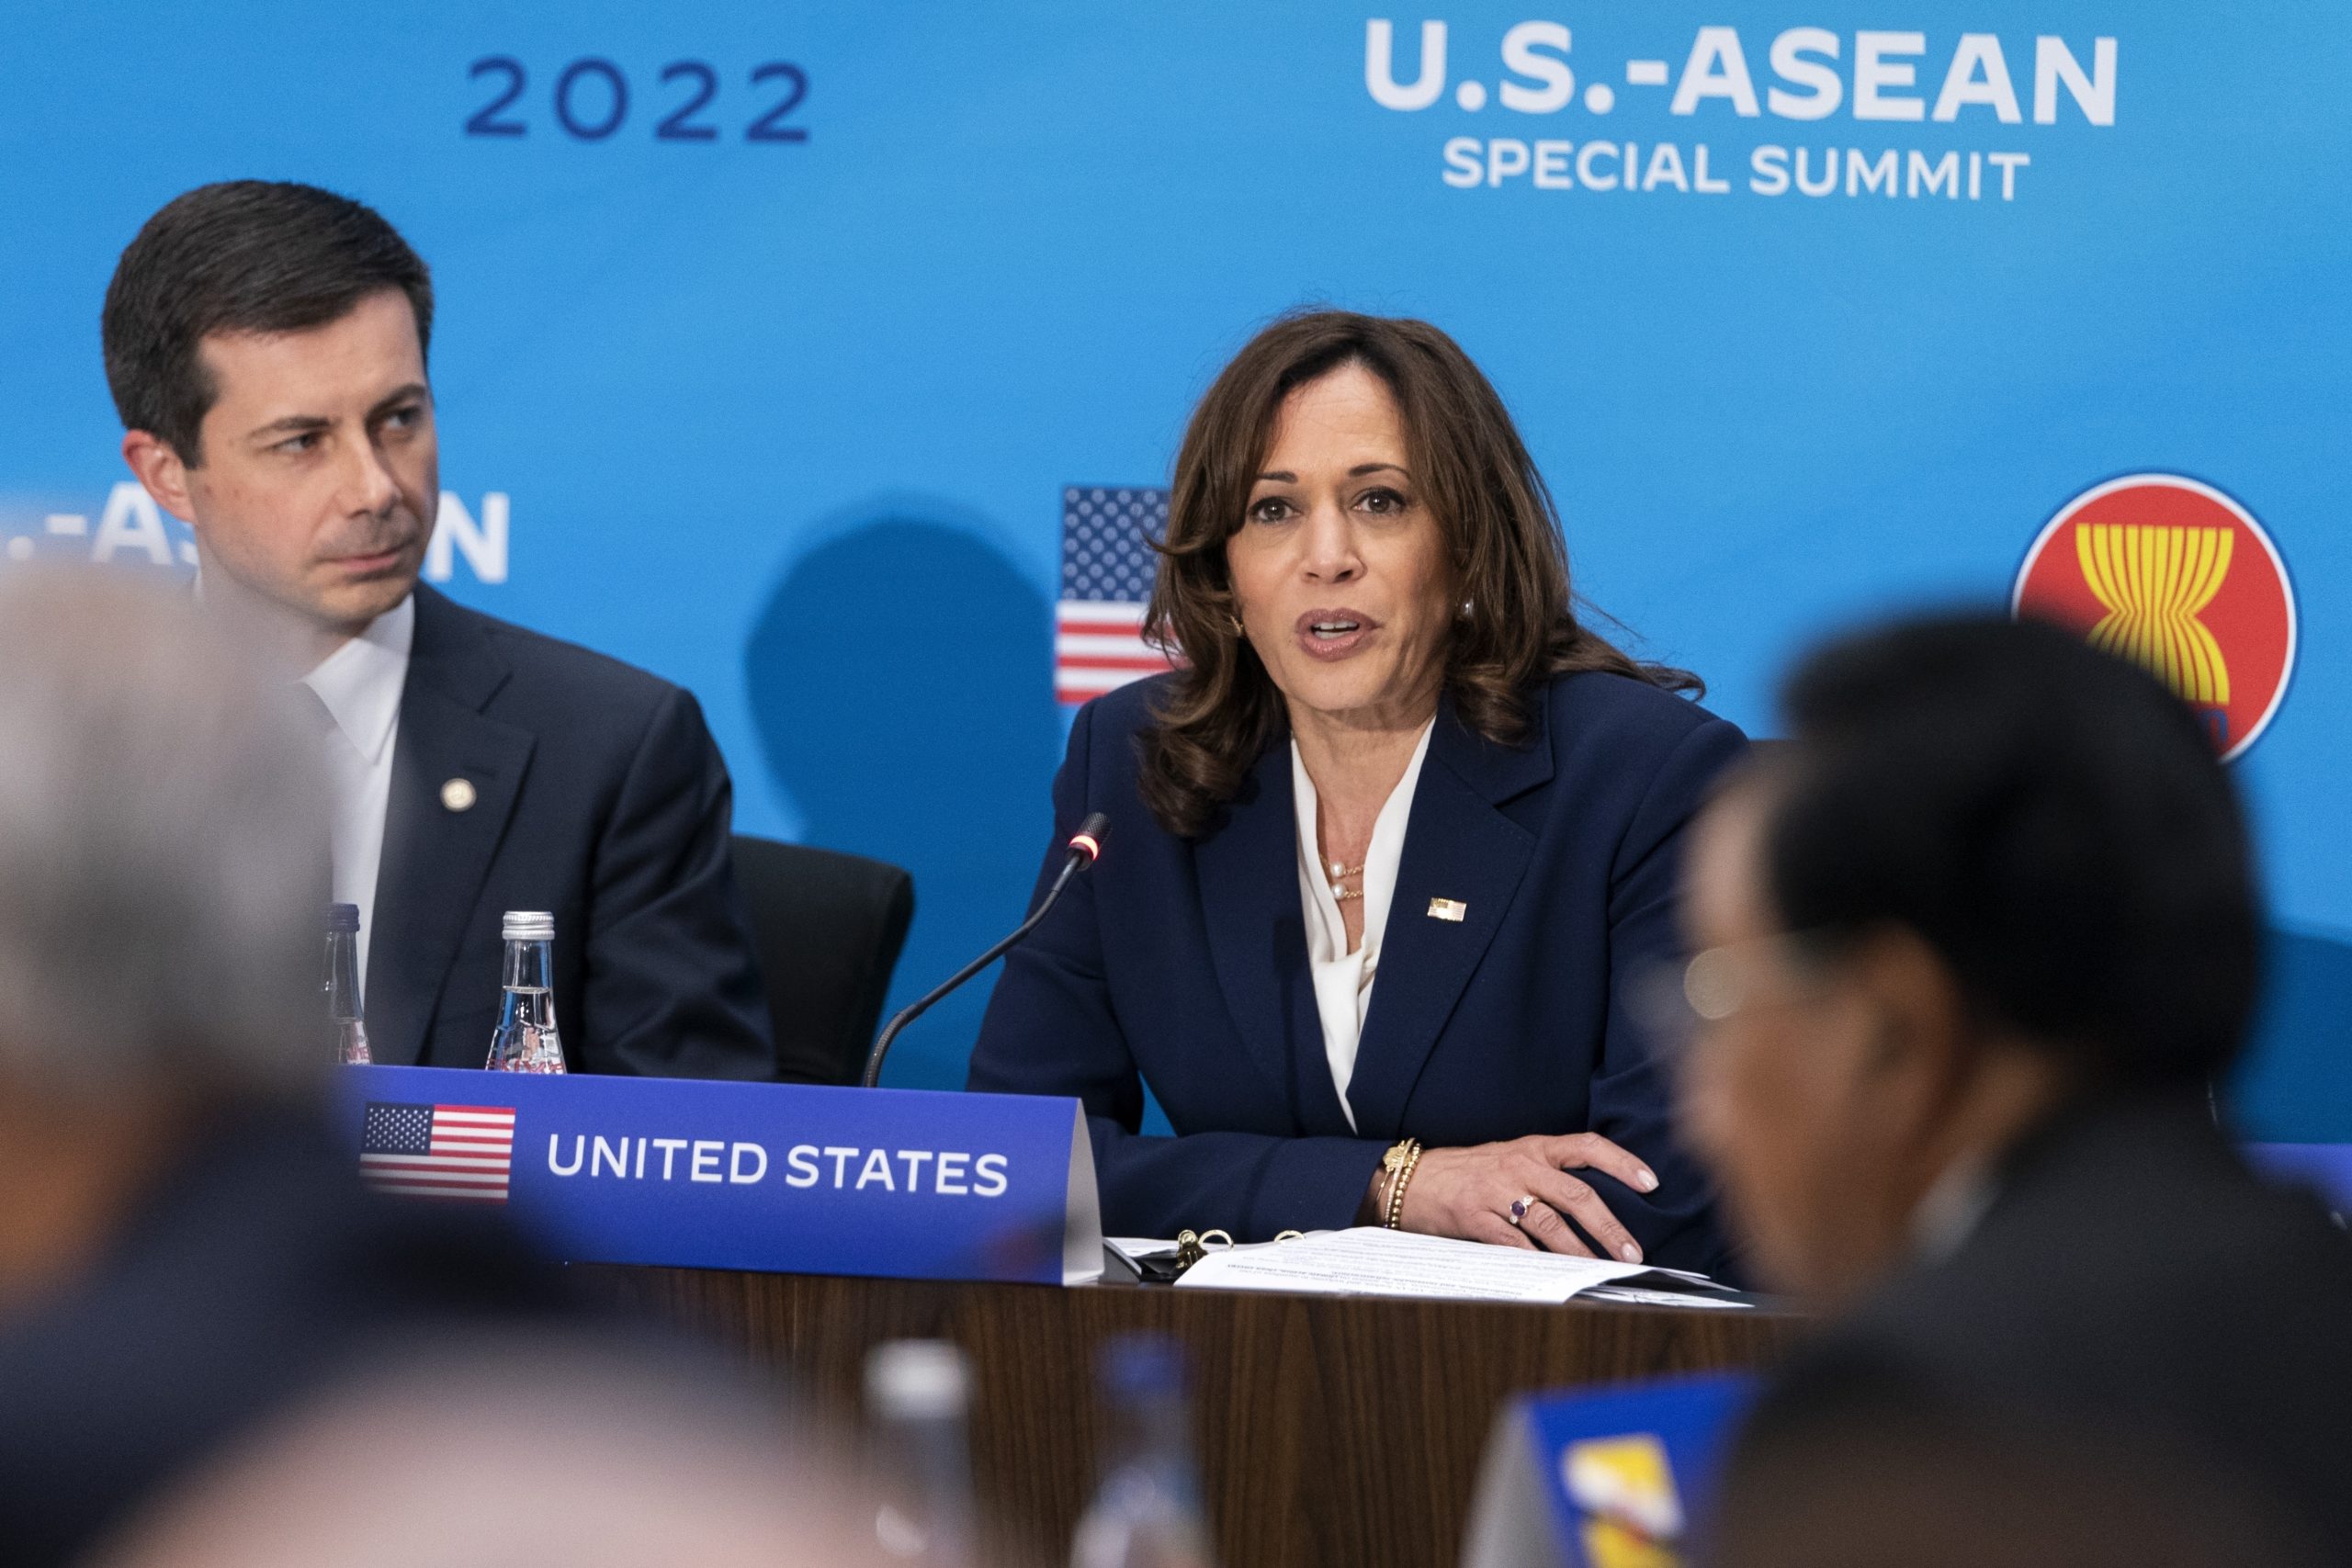 Vice President Kamala Harris, next to Transportation Secretary Pete Buttigieg, speaks at the State Department in Washington, D.C., during the US-ASEAN Summit on May 13, 2022. Harris is visiting Indonesia this week for the 2023 Association of Southeast Nations summit.